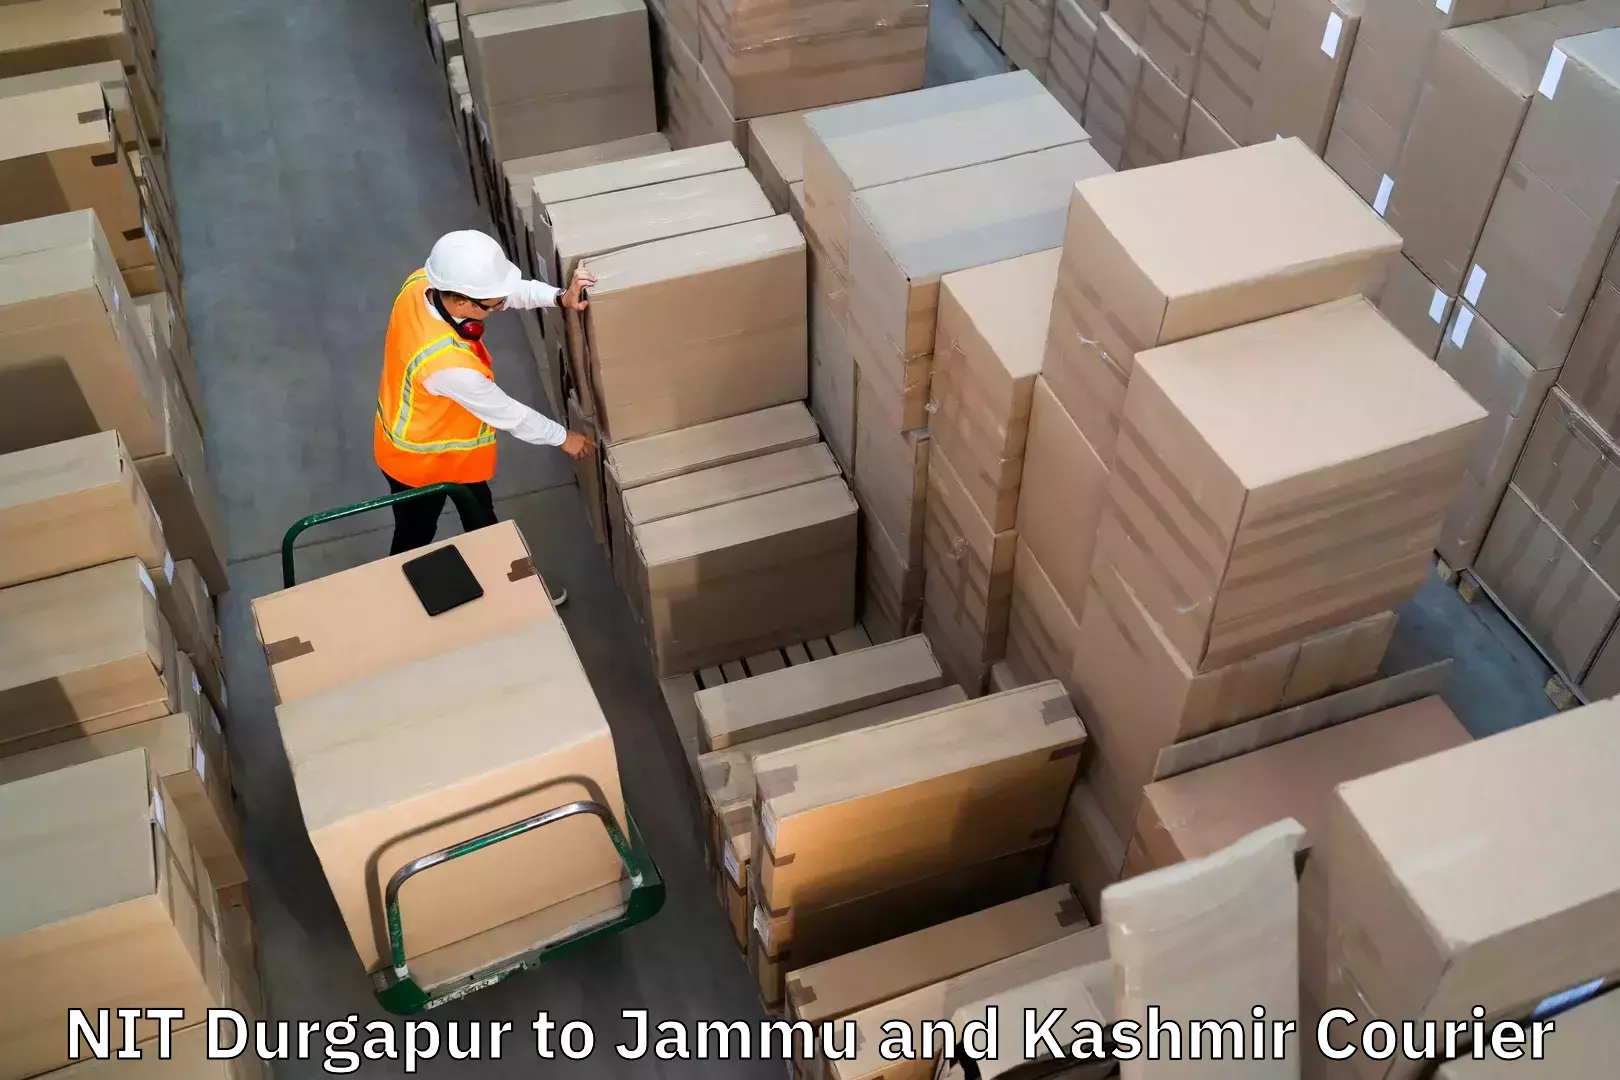 Baggage shipping experience NIT Durgapur to University of Jammu